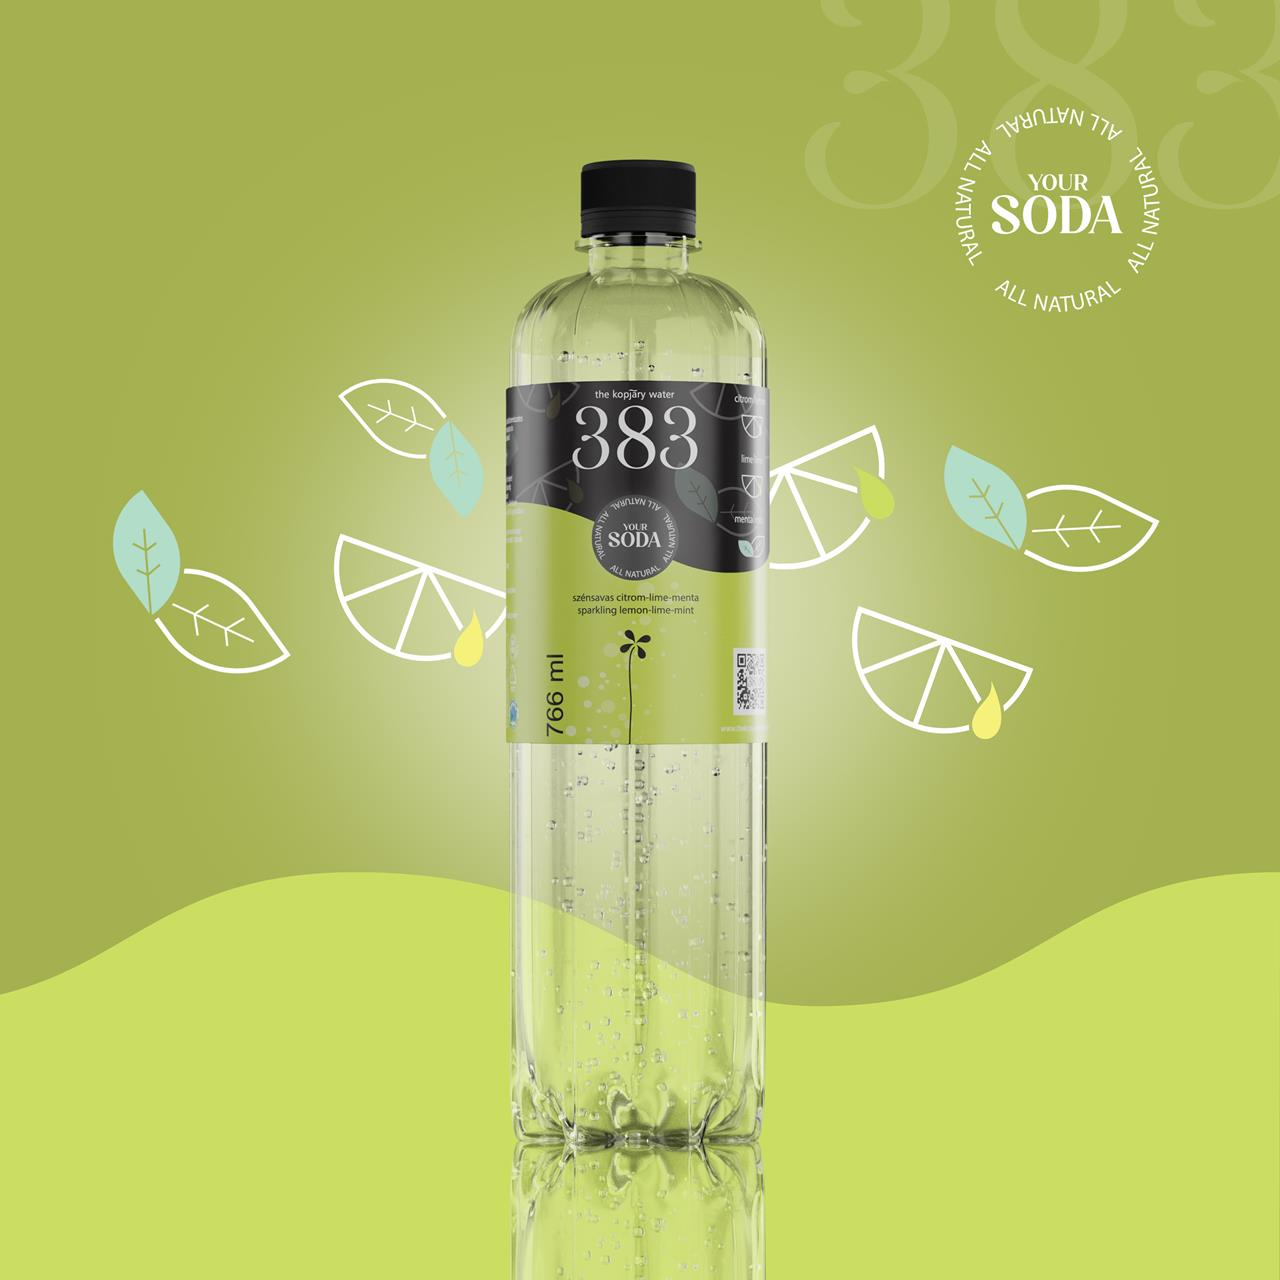 383 THE KOPJARY WATER lemon-lime-mint flavored, carbonated, 766 ml